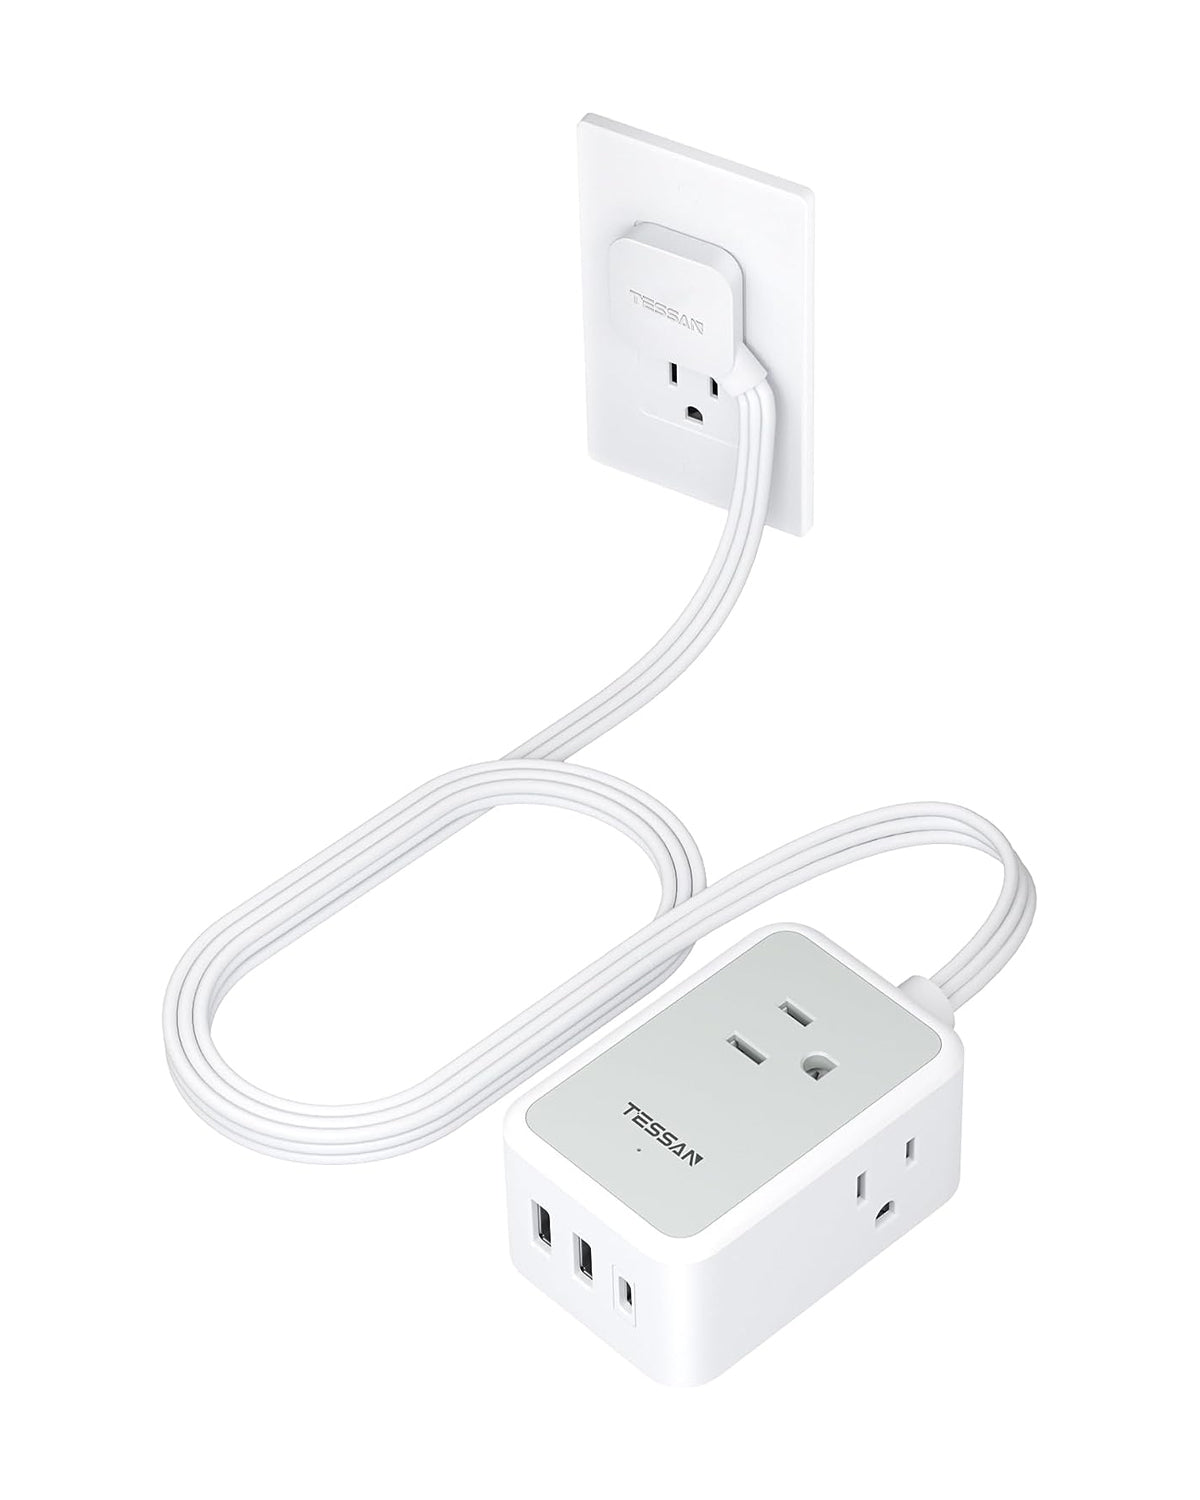 TESSAN Ultra Thin Extension Cord with 3 USB Wall Charger (1 USB C)